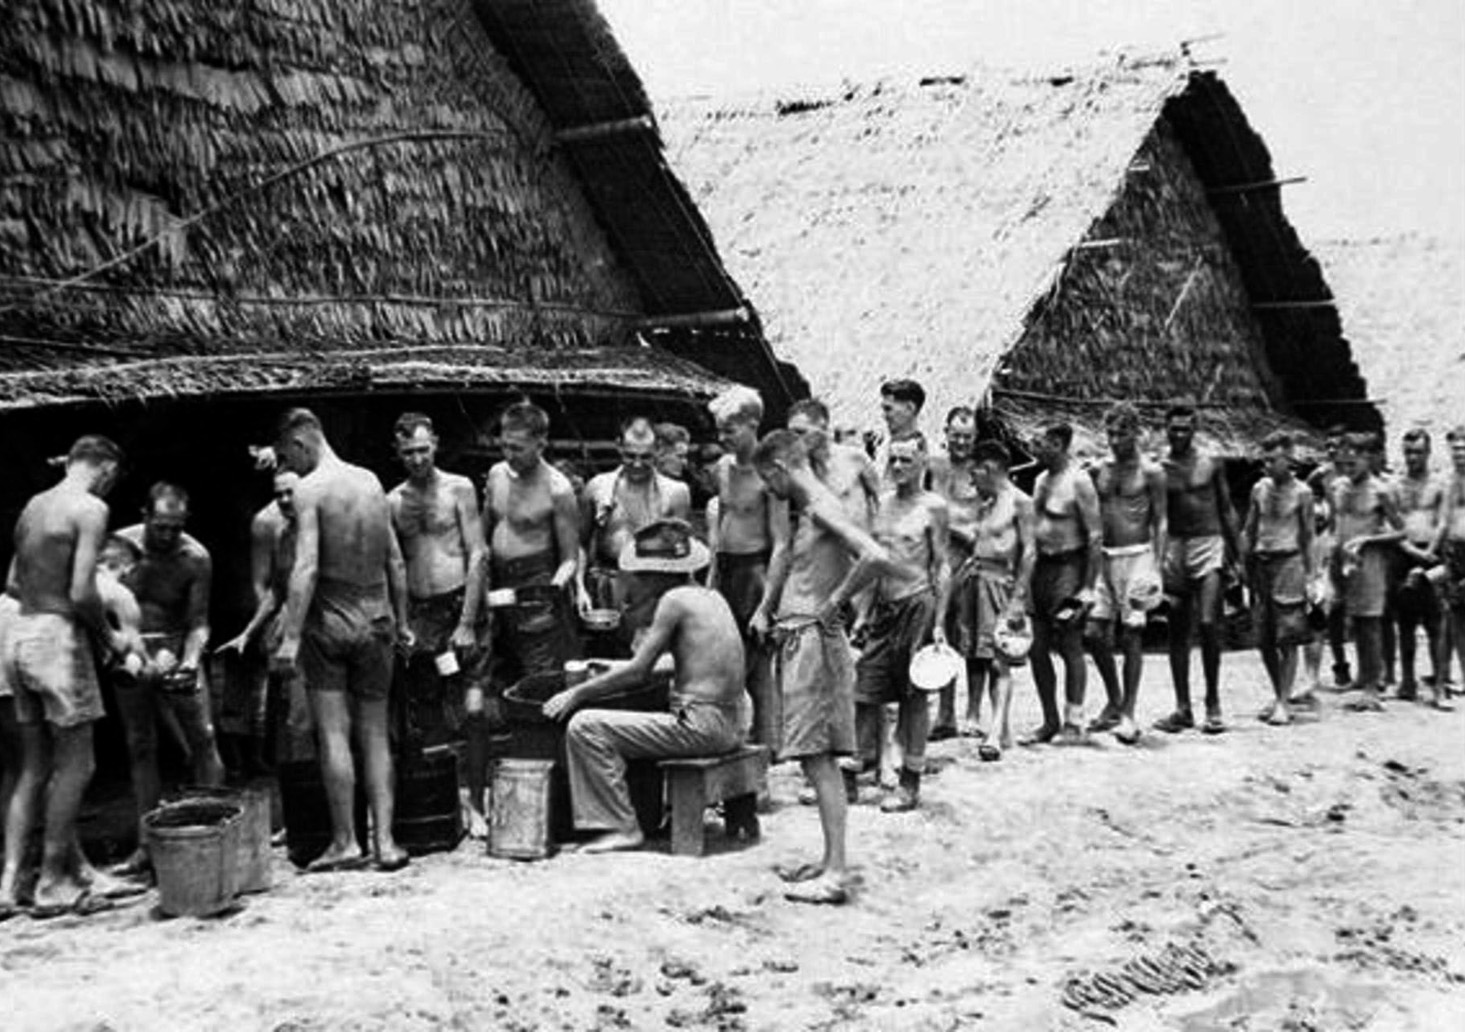 POWs line up for a meal at one of the camps along the Burma-Thailand railway. Each prisoner was supposed to receive 680 grams of rice, 520 grams of vegetables, and 110 grams of meat or fish daily—portions that were rarely reached.